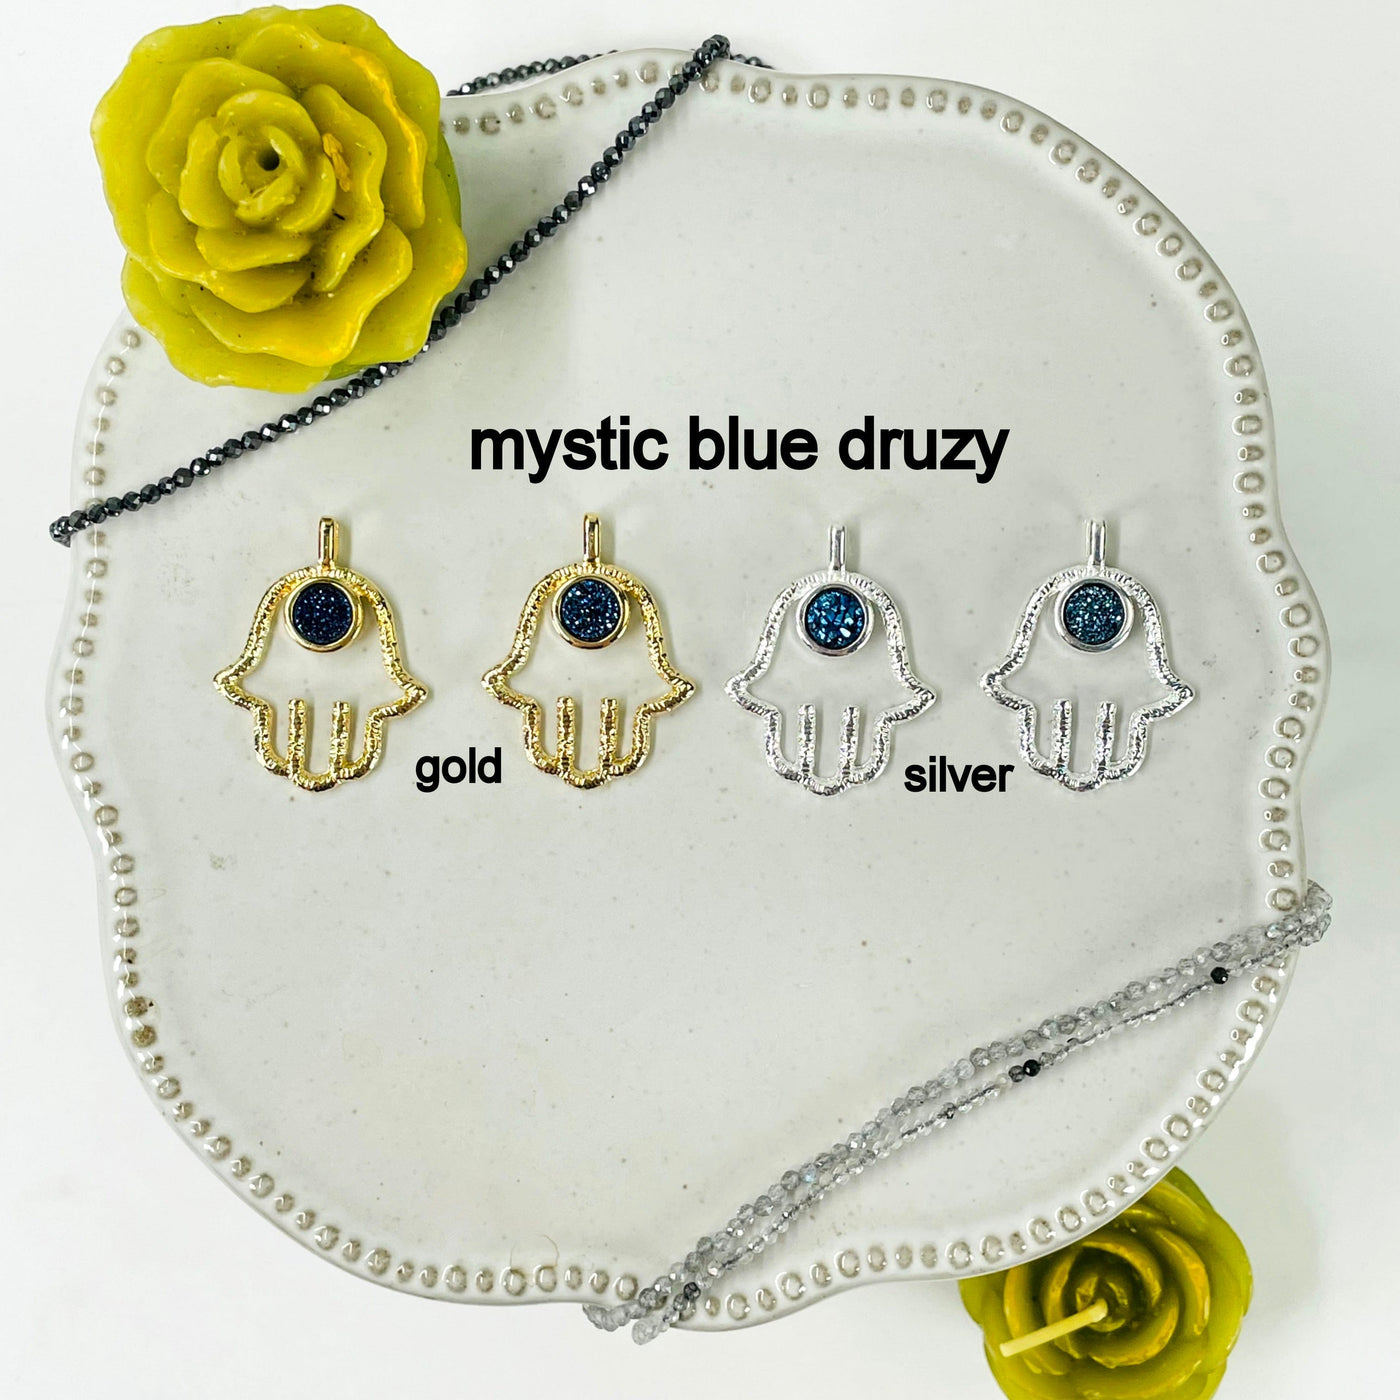 two gold and two silver hamsa hand pendants with mystic blue druzy accents